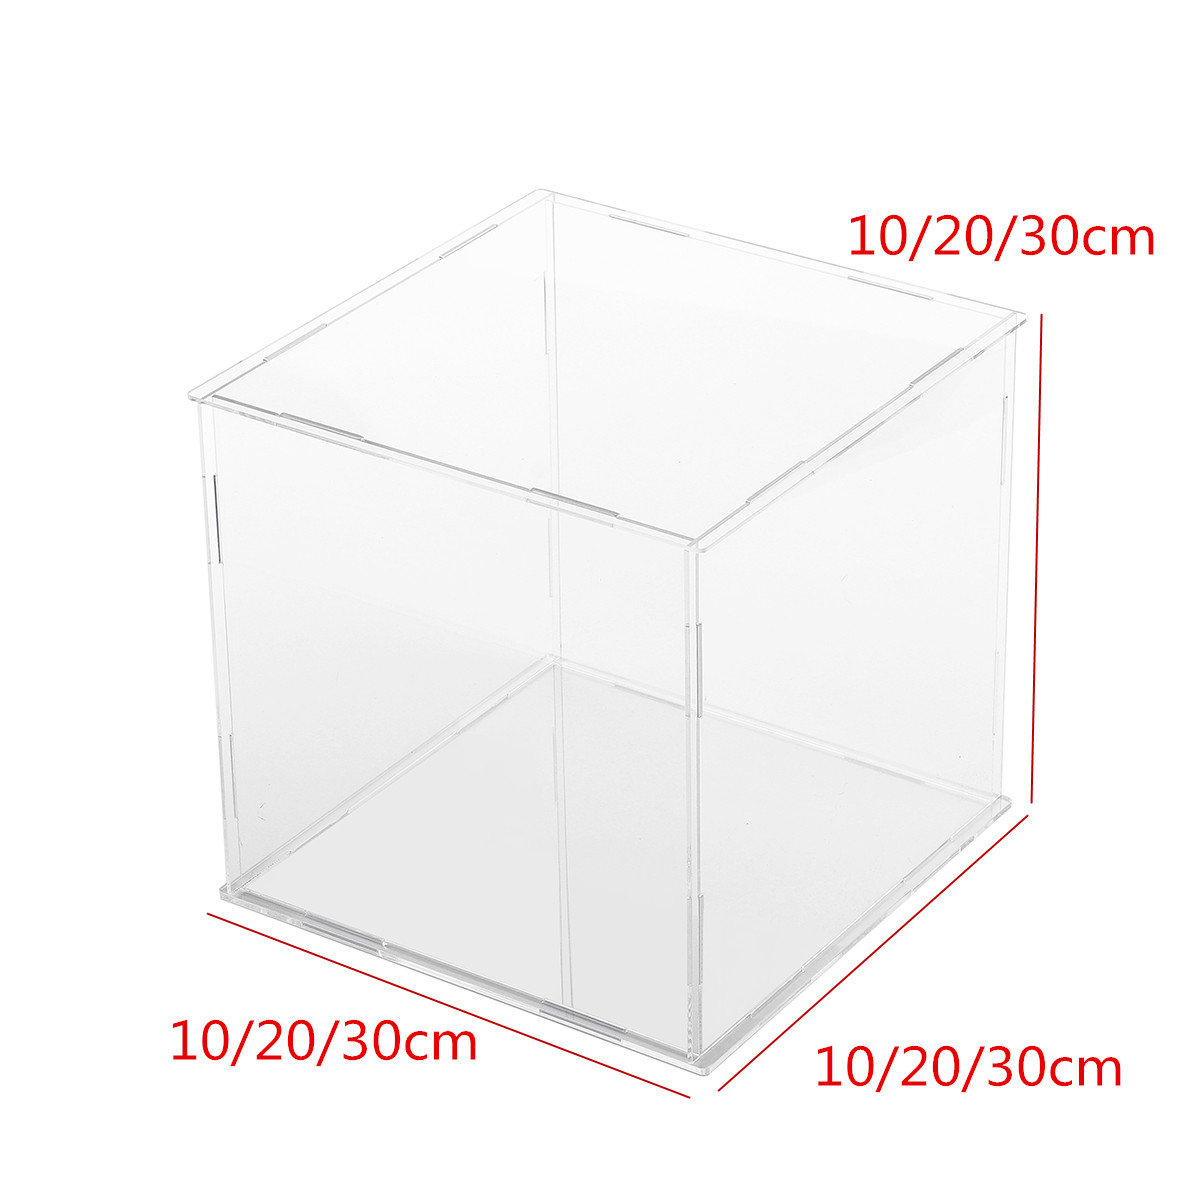 102030cm-Acrylic-Display-Case-Box-Dustproof-Self-Assembly-Model-Protection-1640462-4